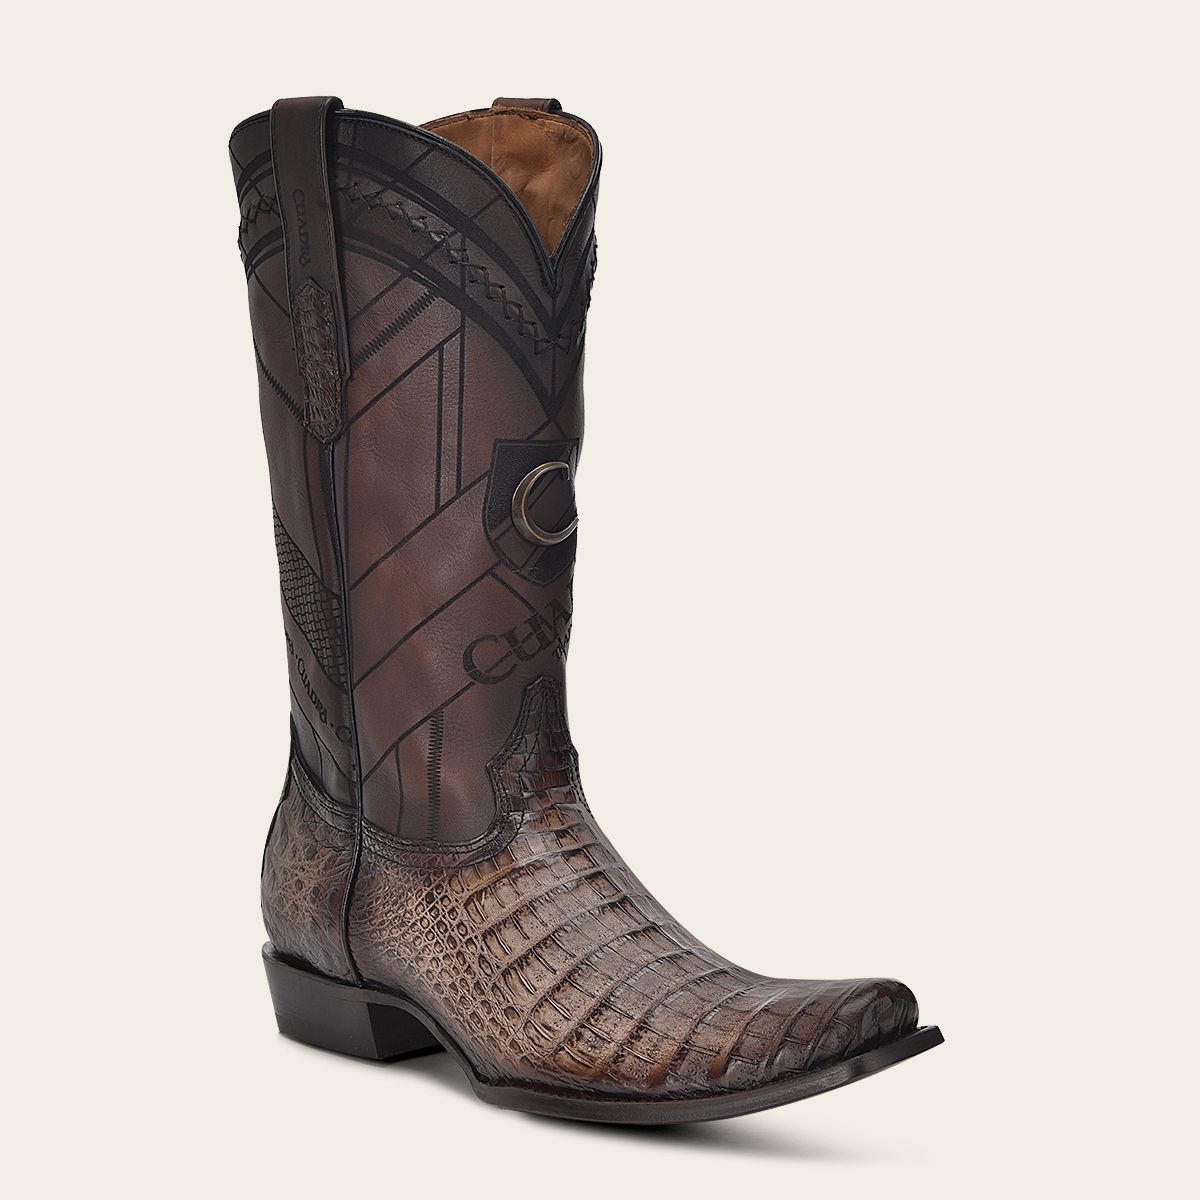 Hand-painted traditional exotic dark brown leather boot